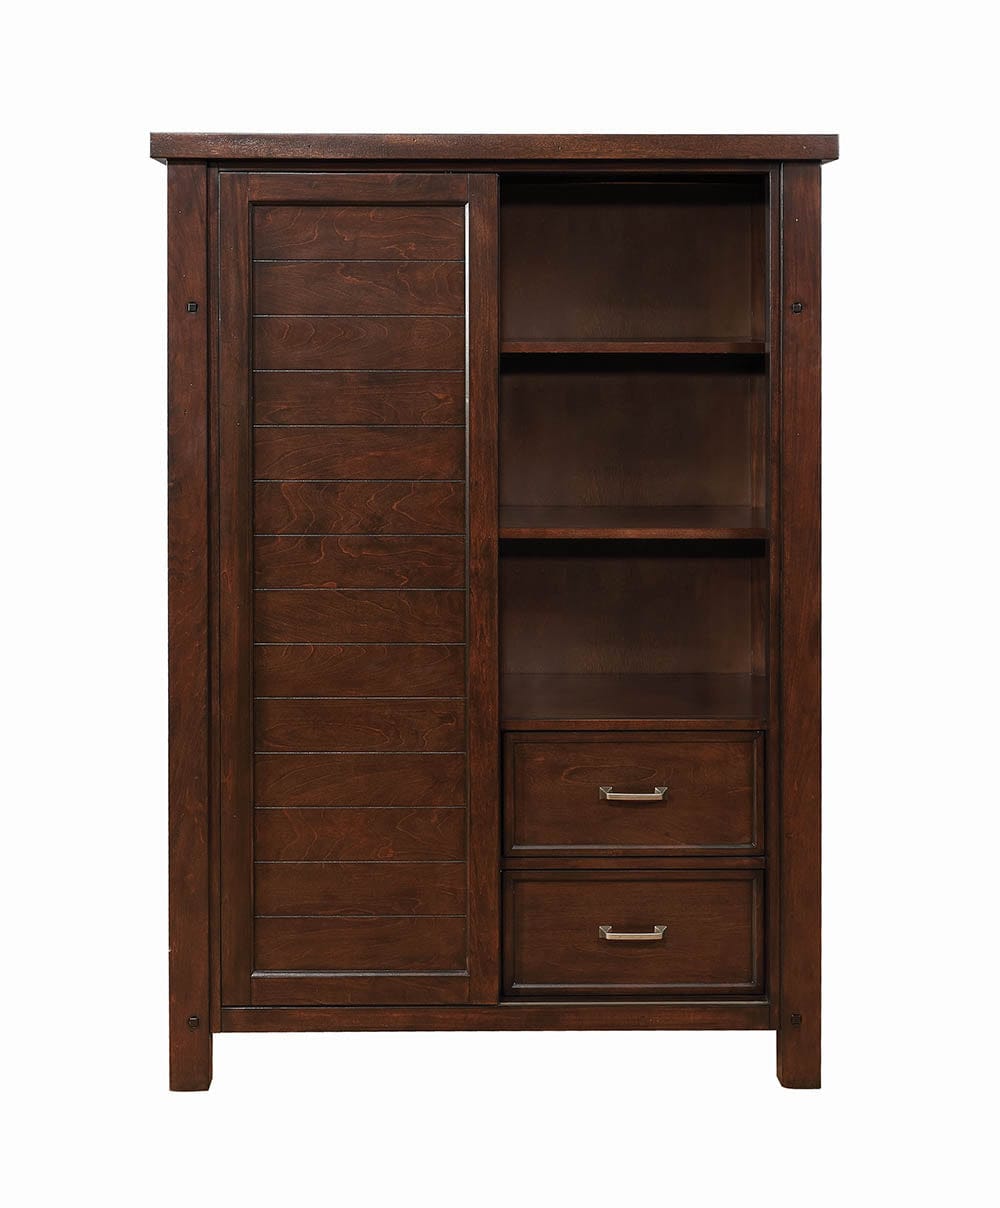 Barstow 8-Drawer Door Chest Pinot Noir Collection: Barstow SKU: 206436